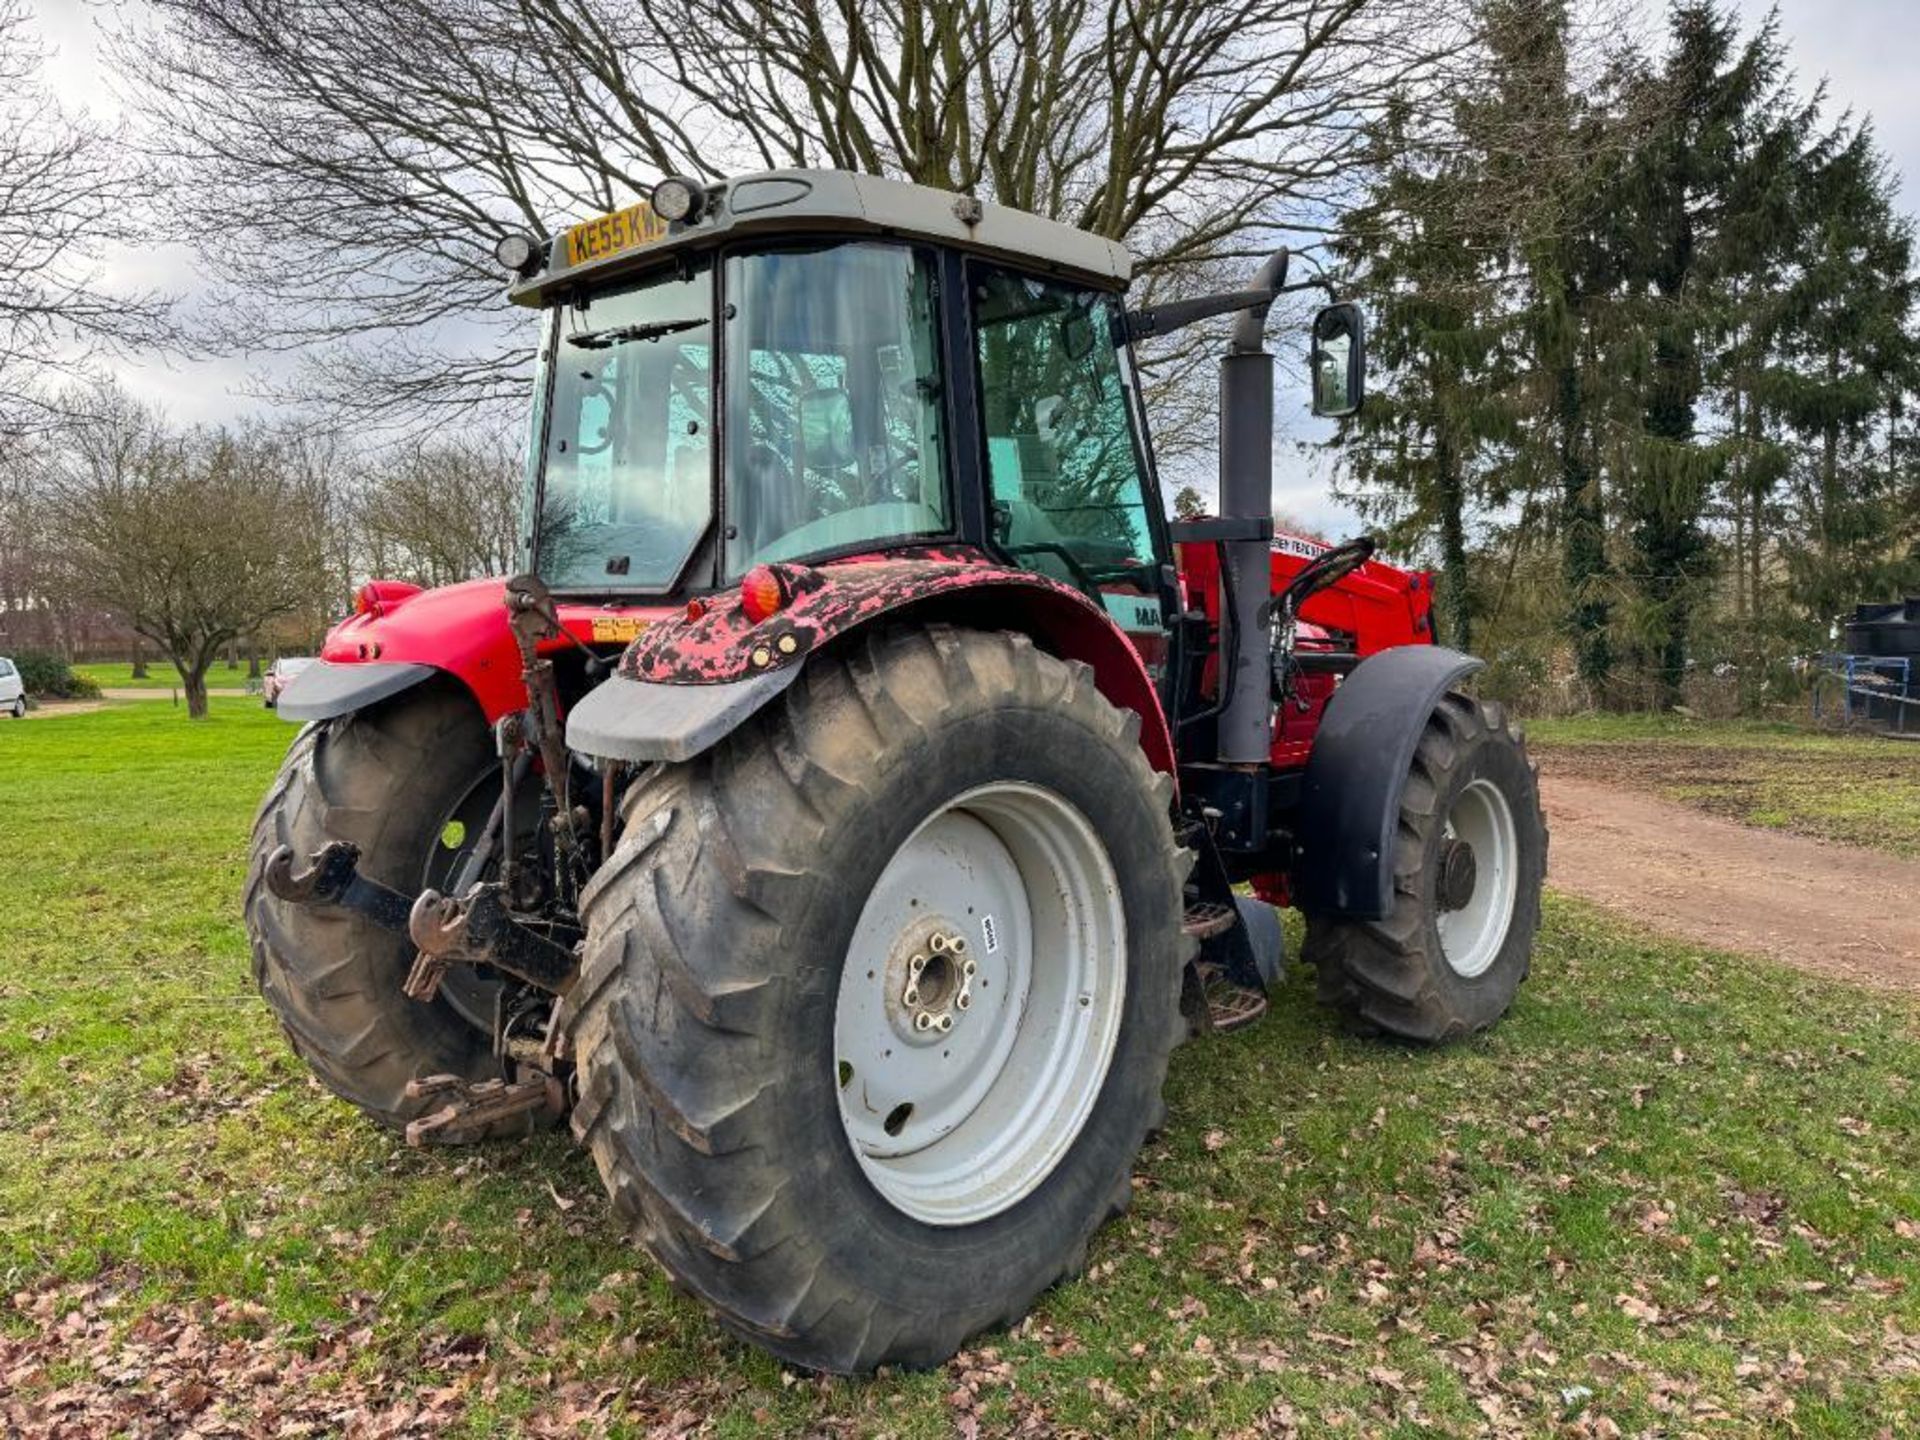 2005 Massey Ferguson 6480 Dynashift 4wd 40kph tractor with 3 manual spools, 10No front wafer weights - Image 18 of 26